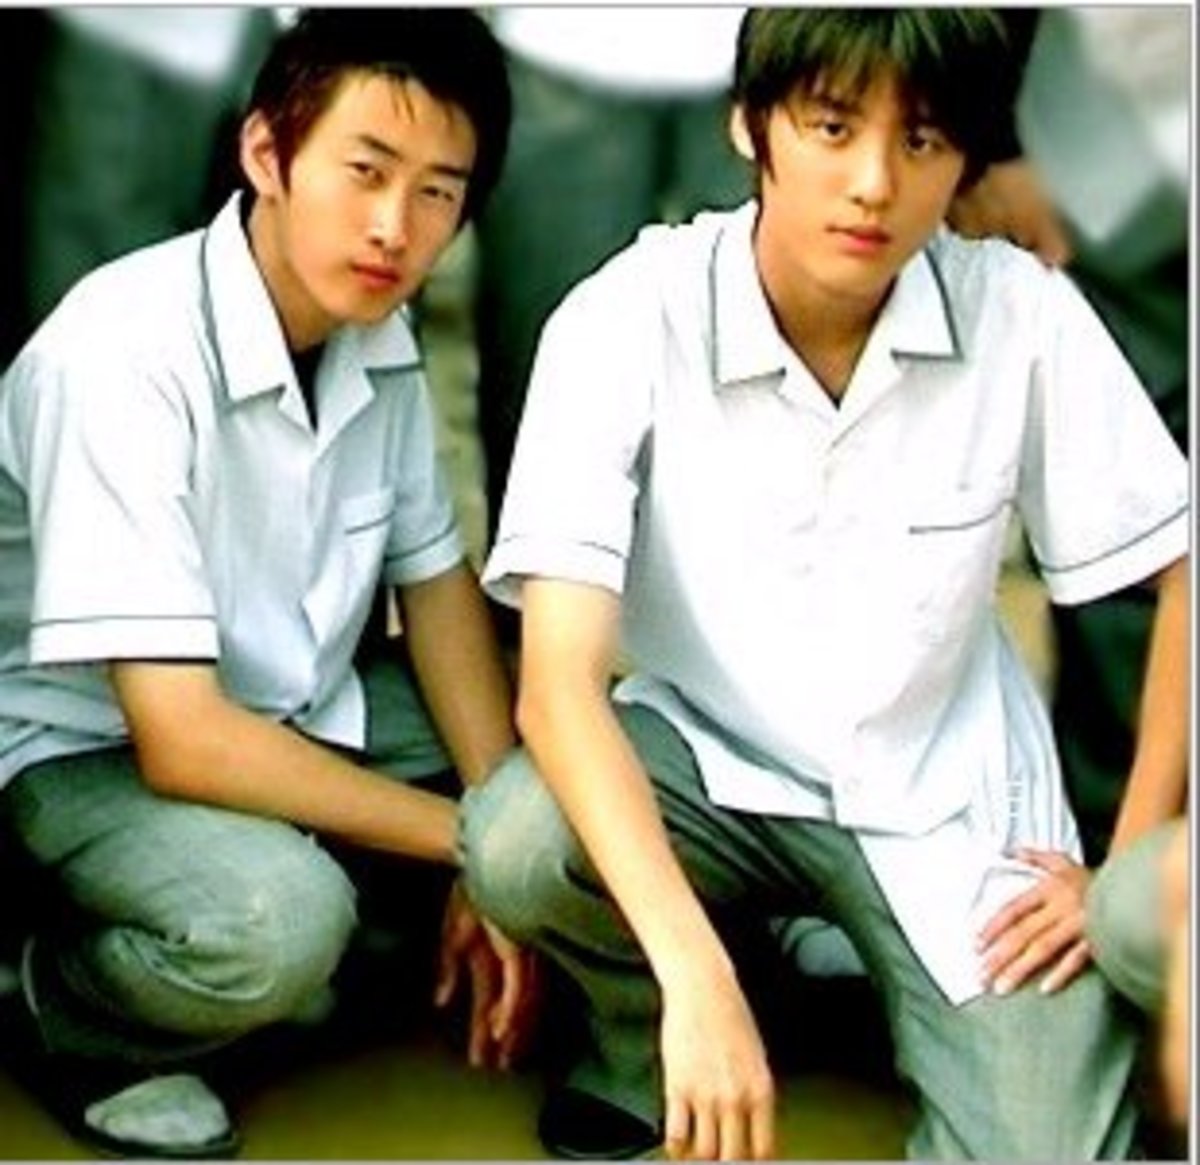 Eunhyuk and Junsu during their middle school days.